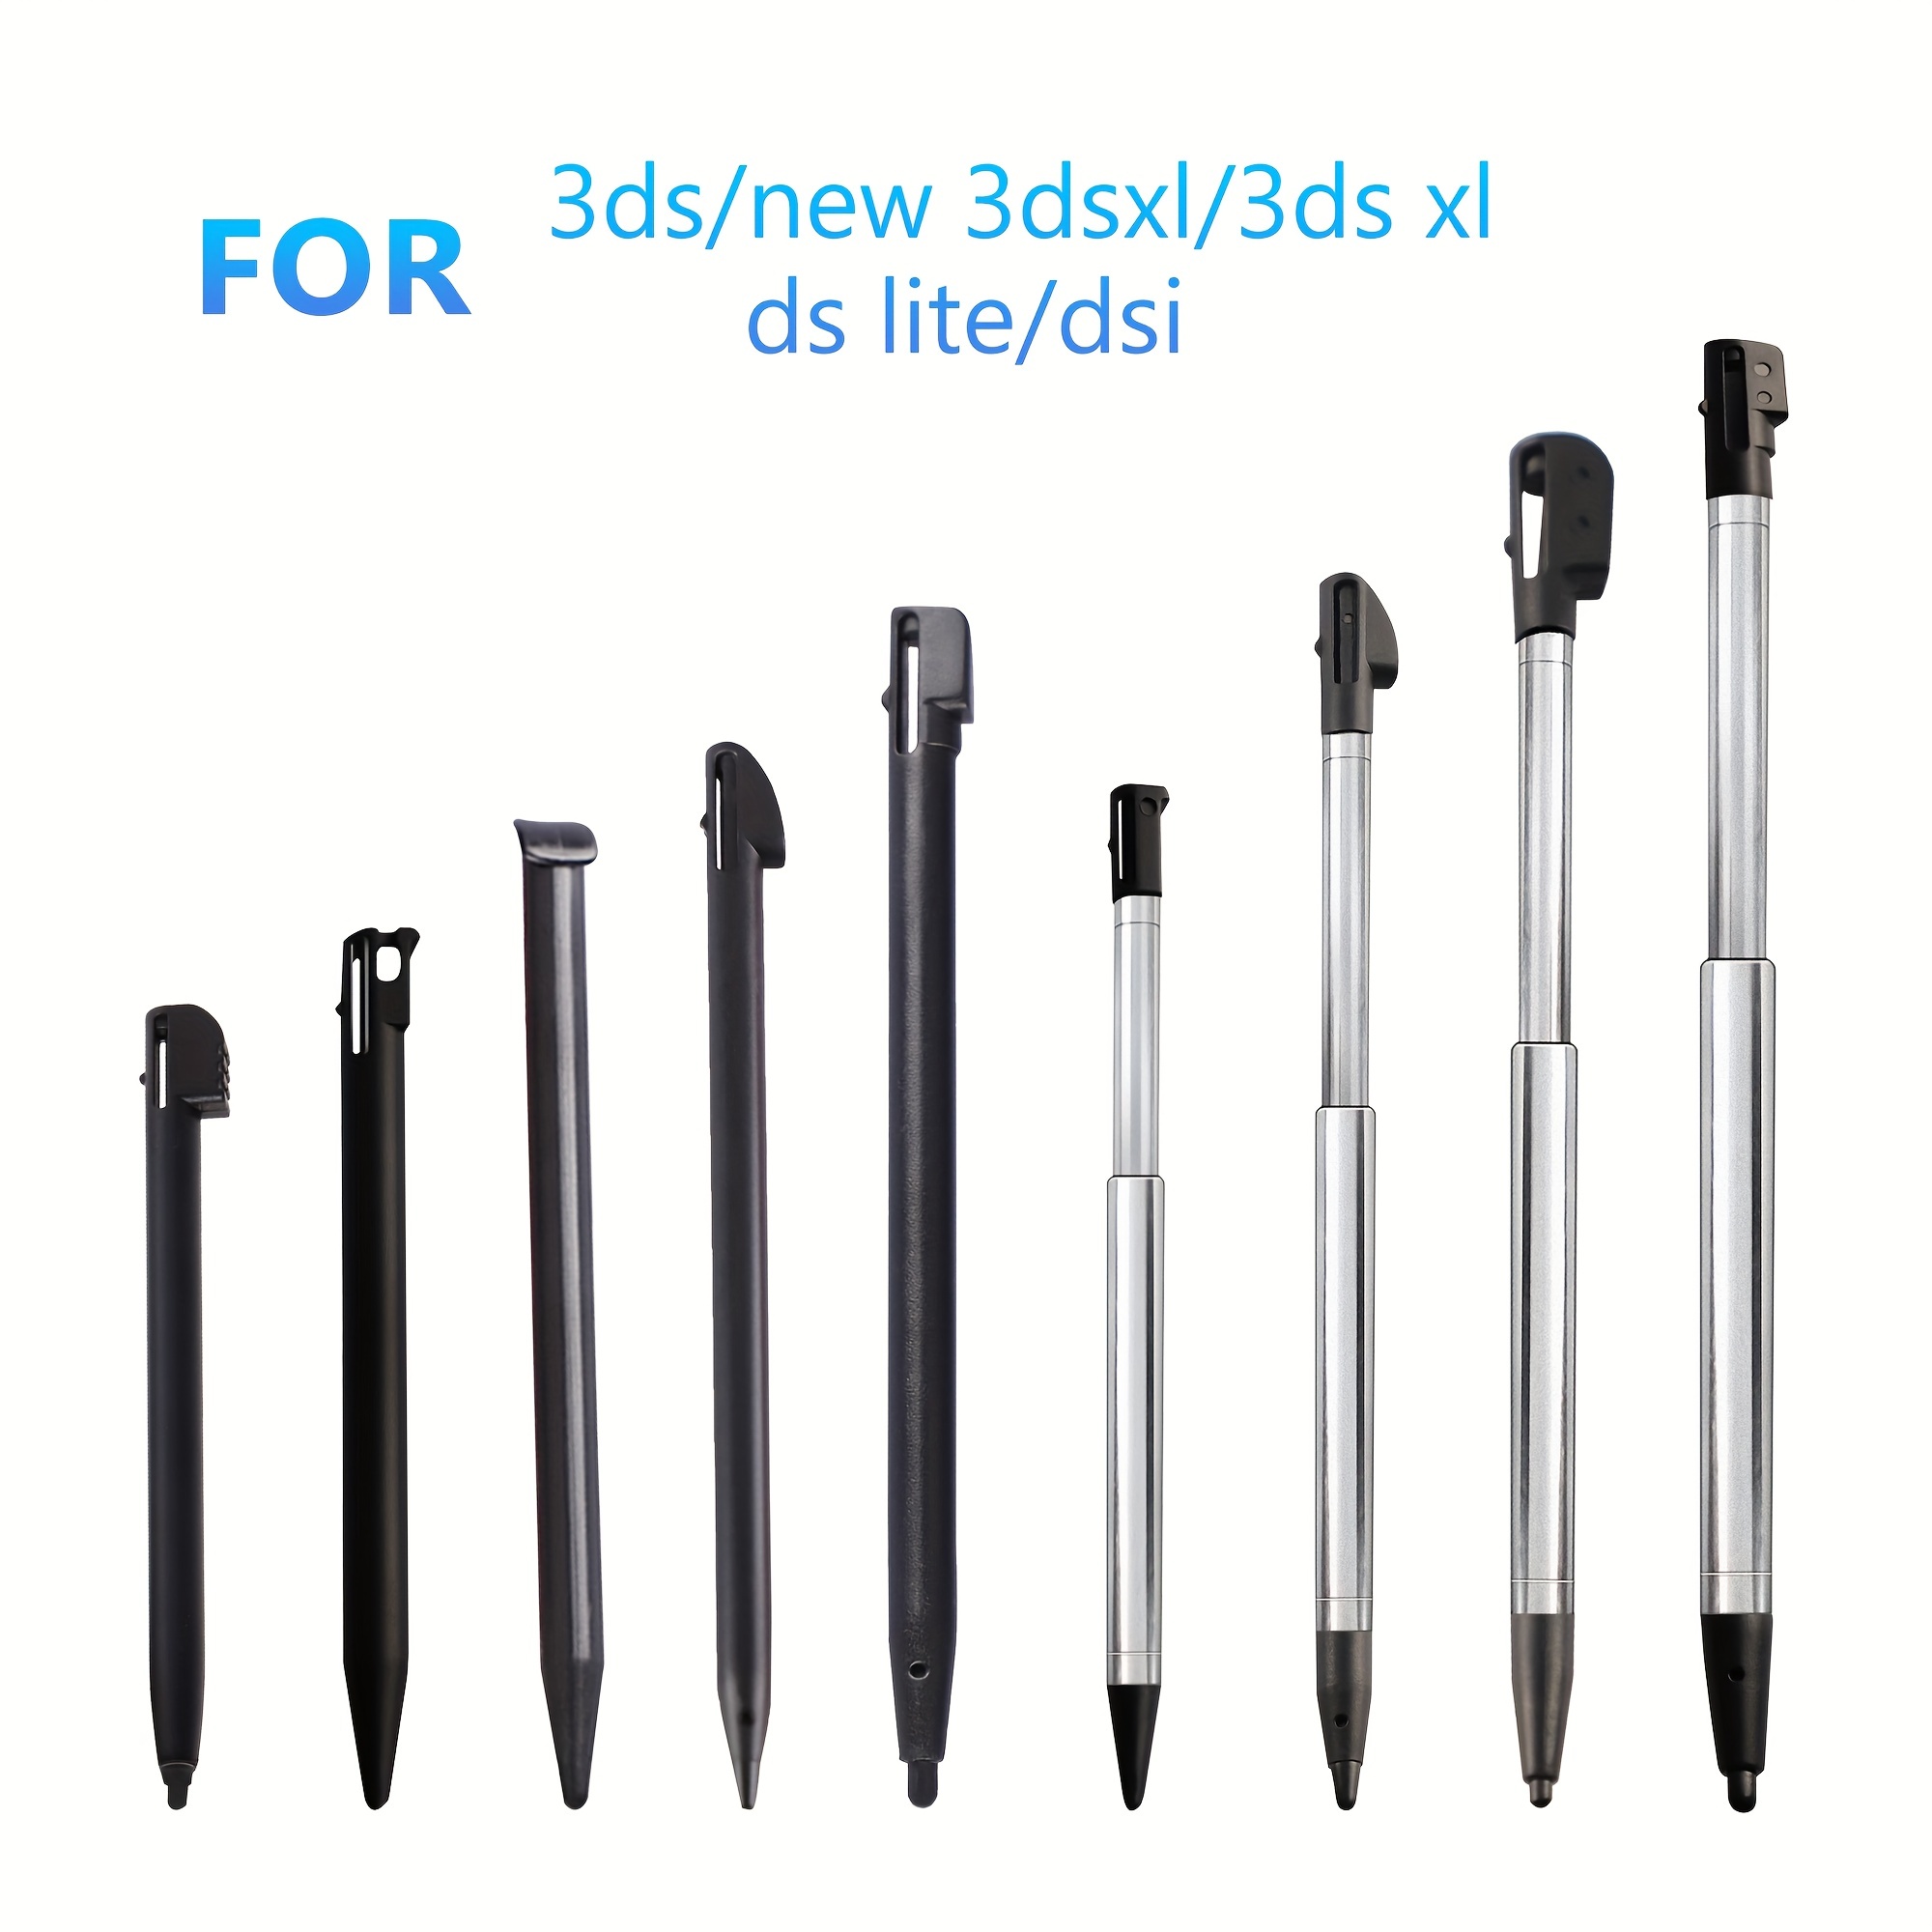 Stylet Stylo Stylo 4 X Touch pour Nintendo NDS DS Lite DSL NDSL Nouveau